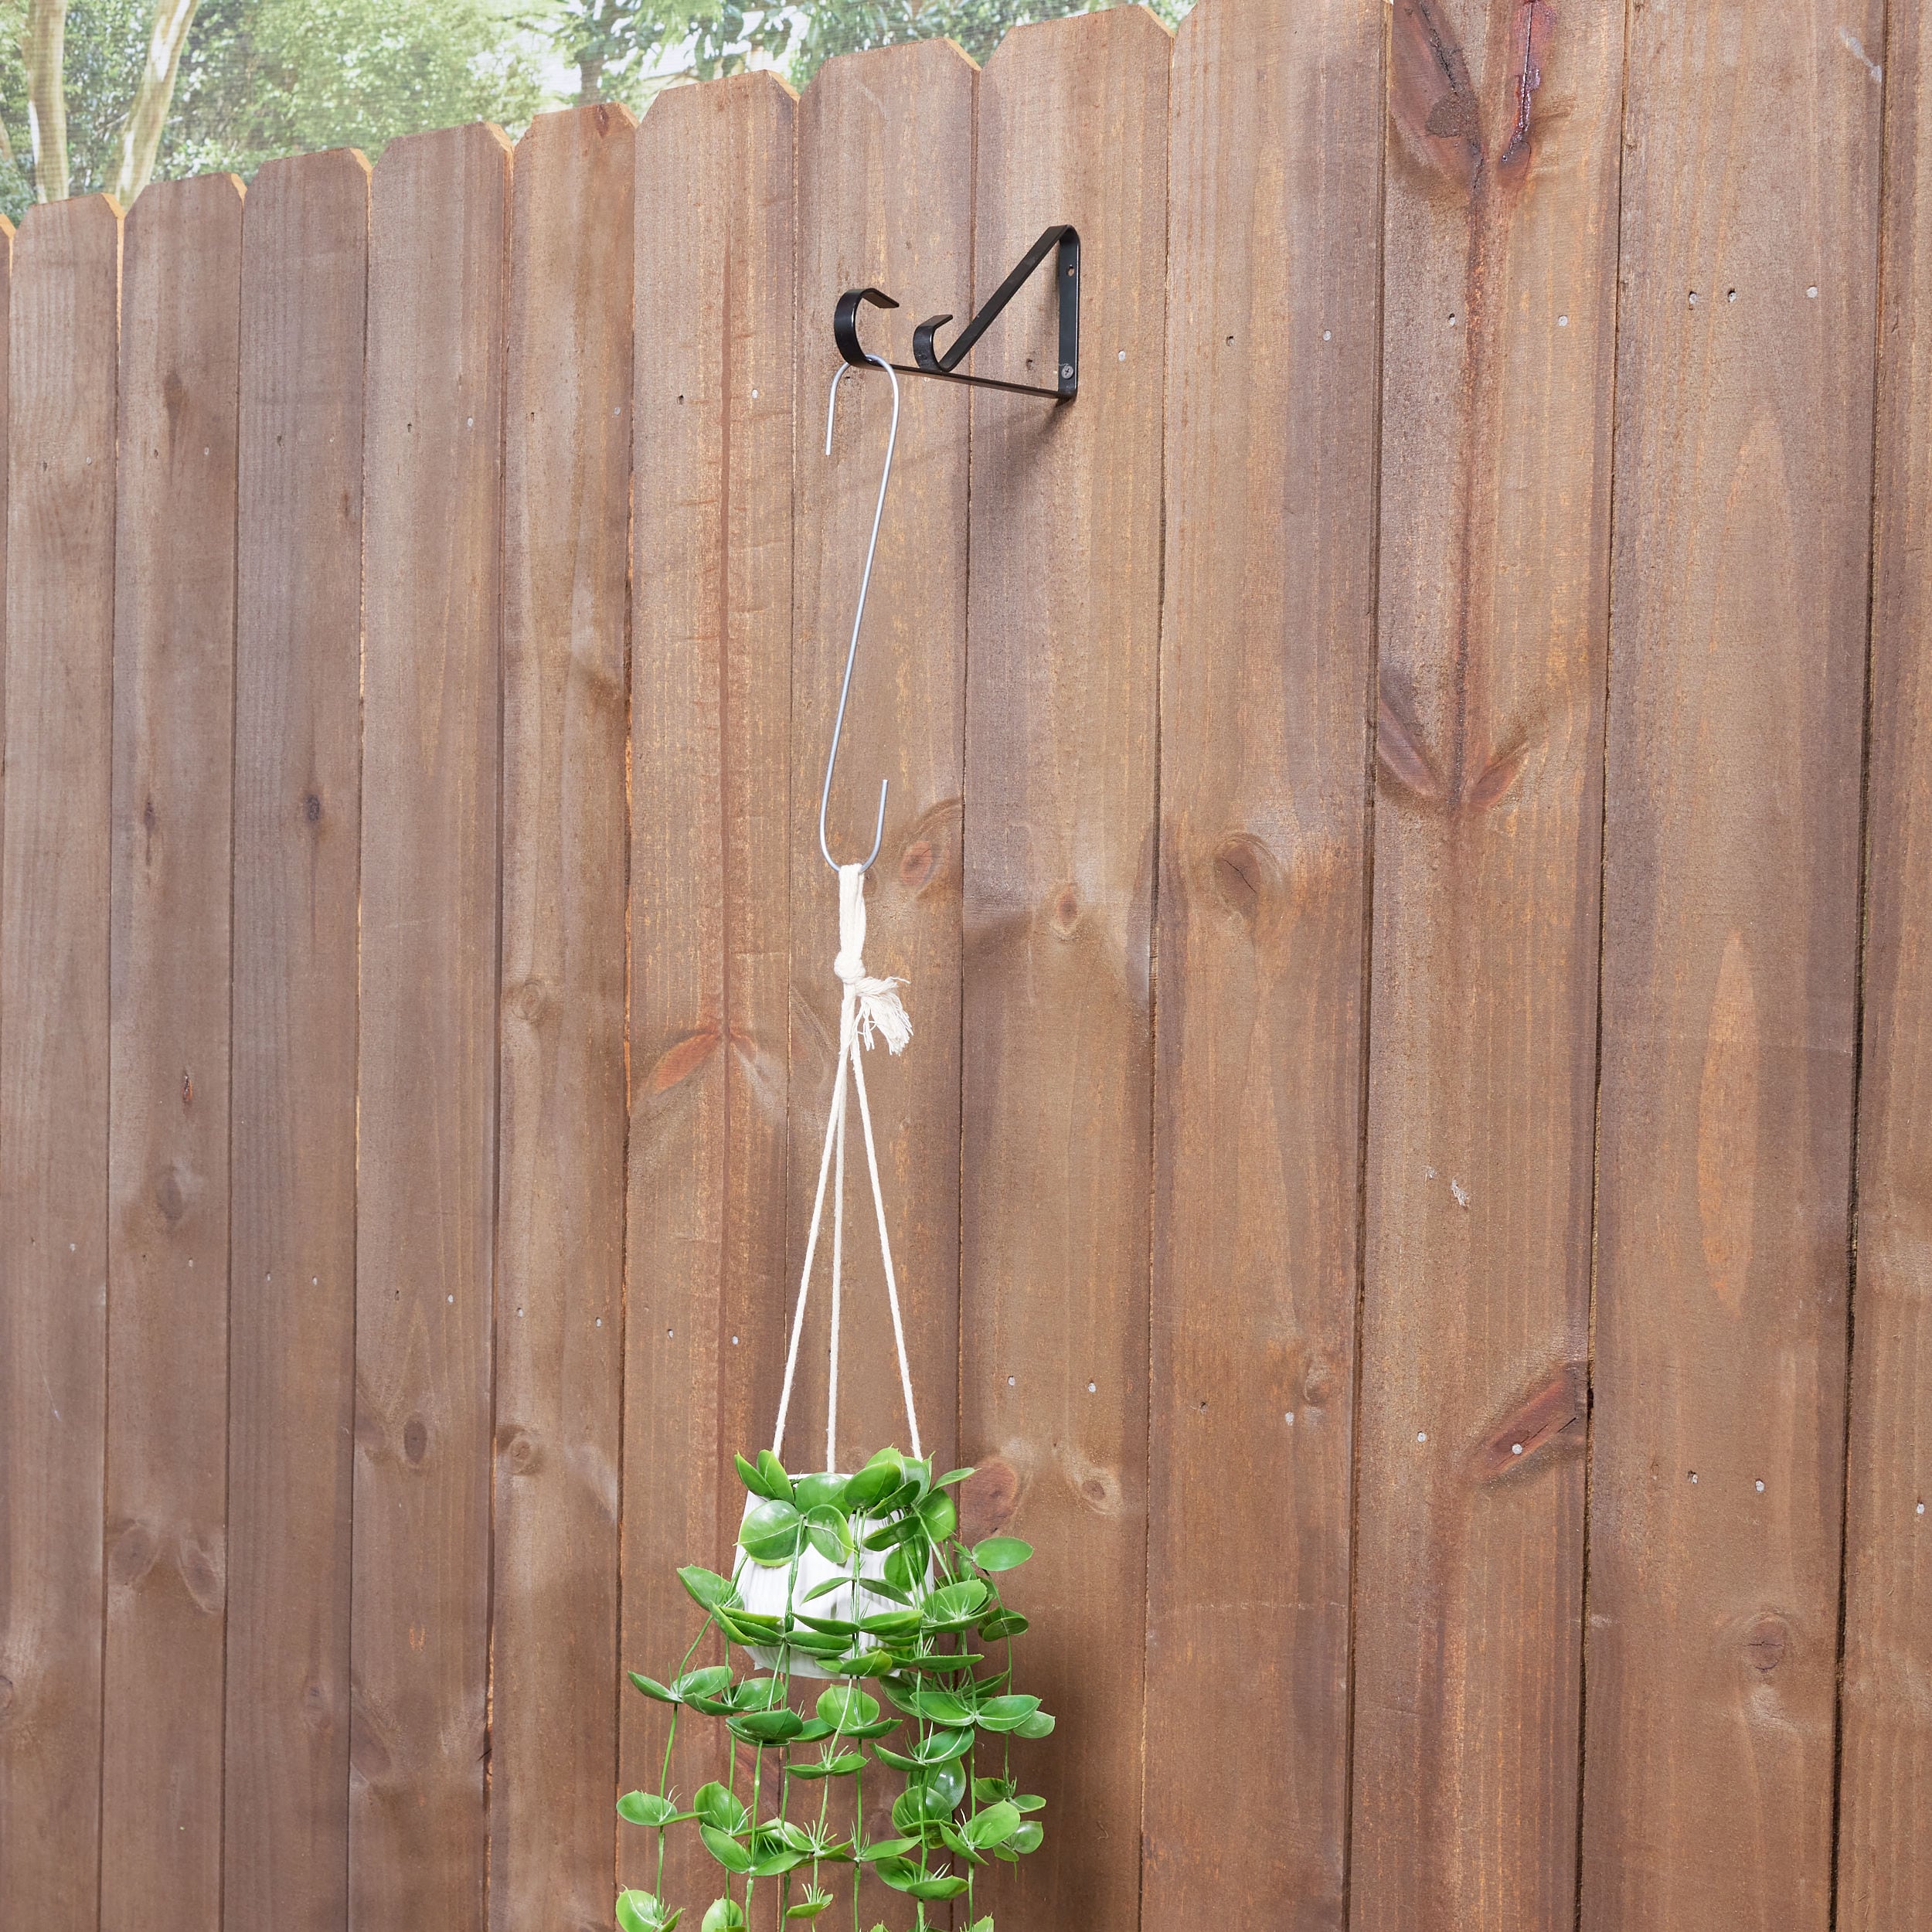 Natural Wood & Metal Wall Hanger with 3 Hooks - Foreside Home & Garden